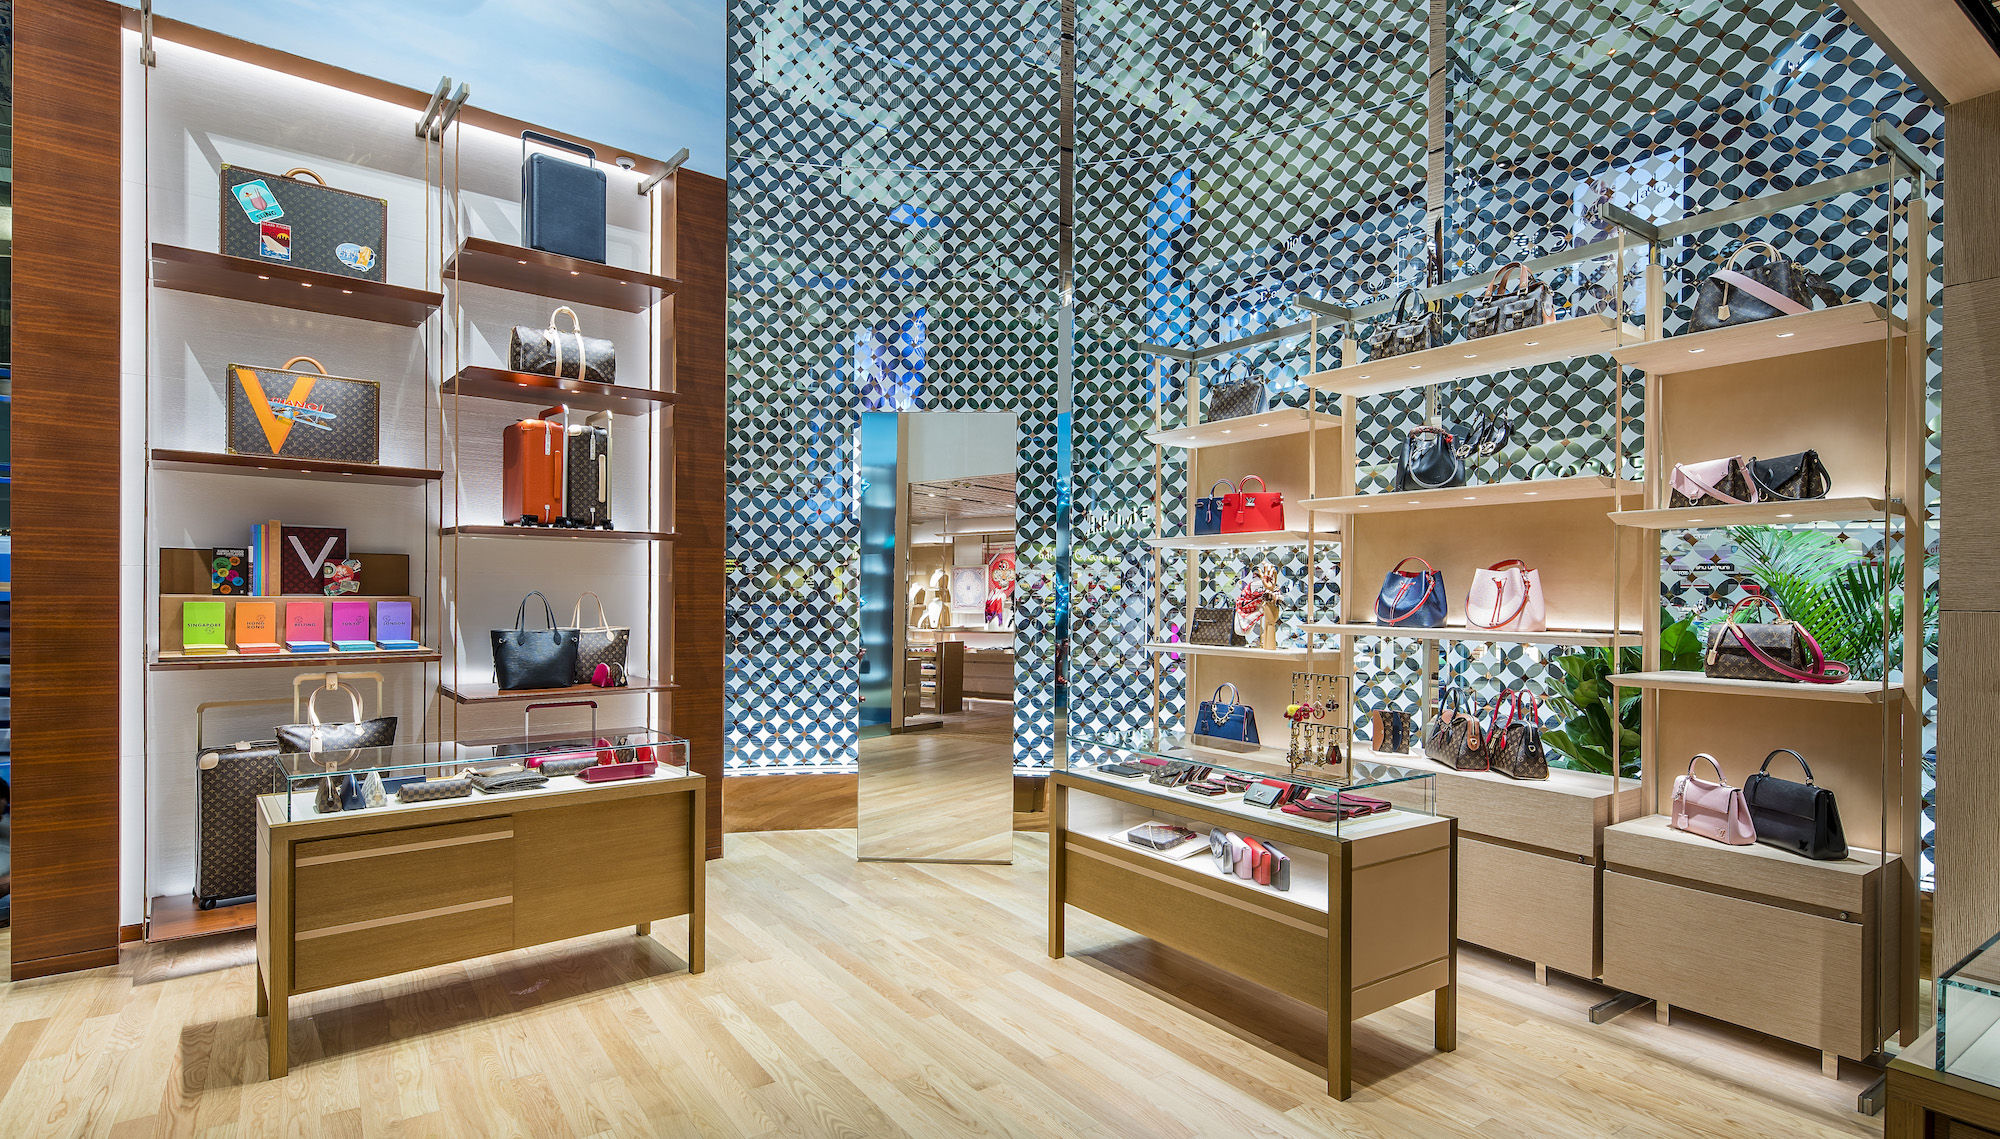 Louis Vuitton opens first airport boutique in South Asia at Changi